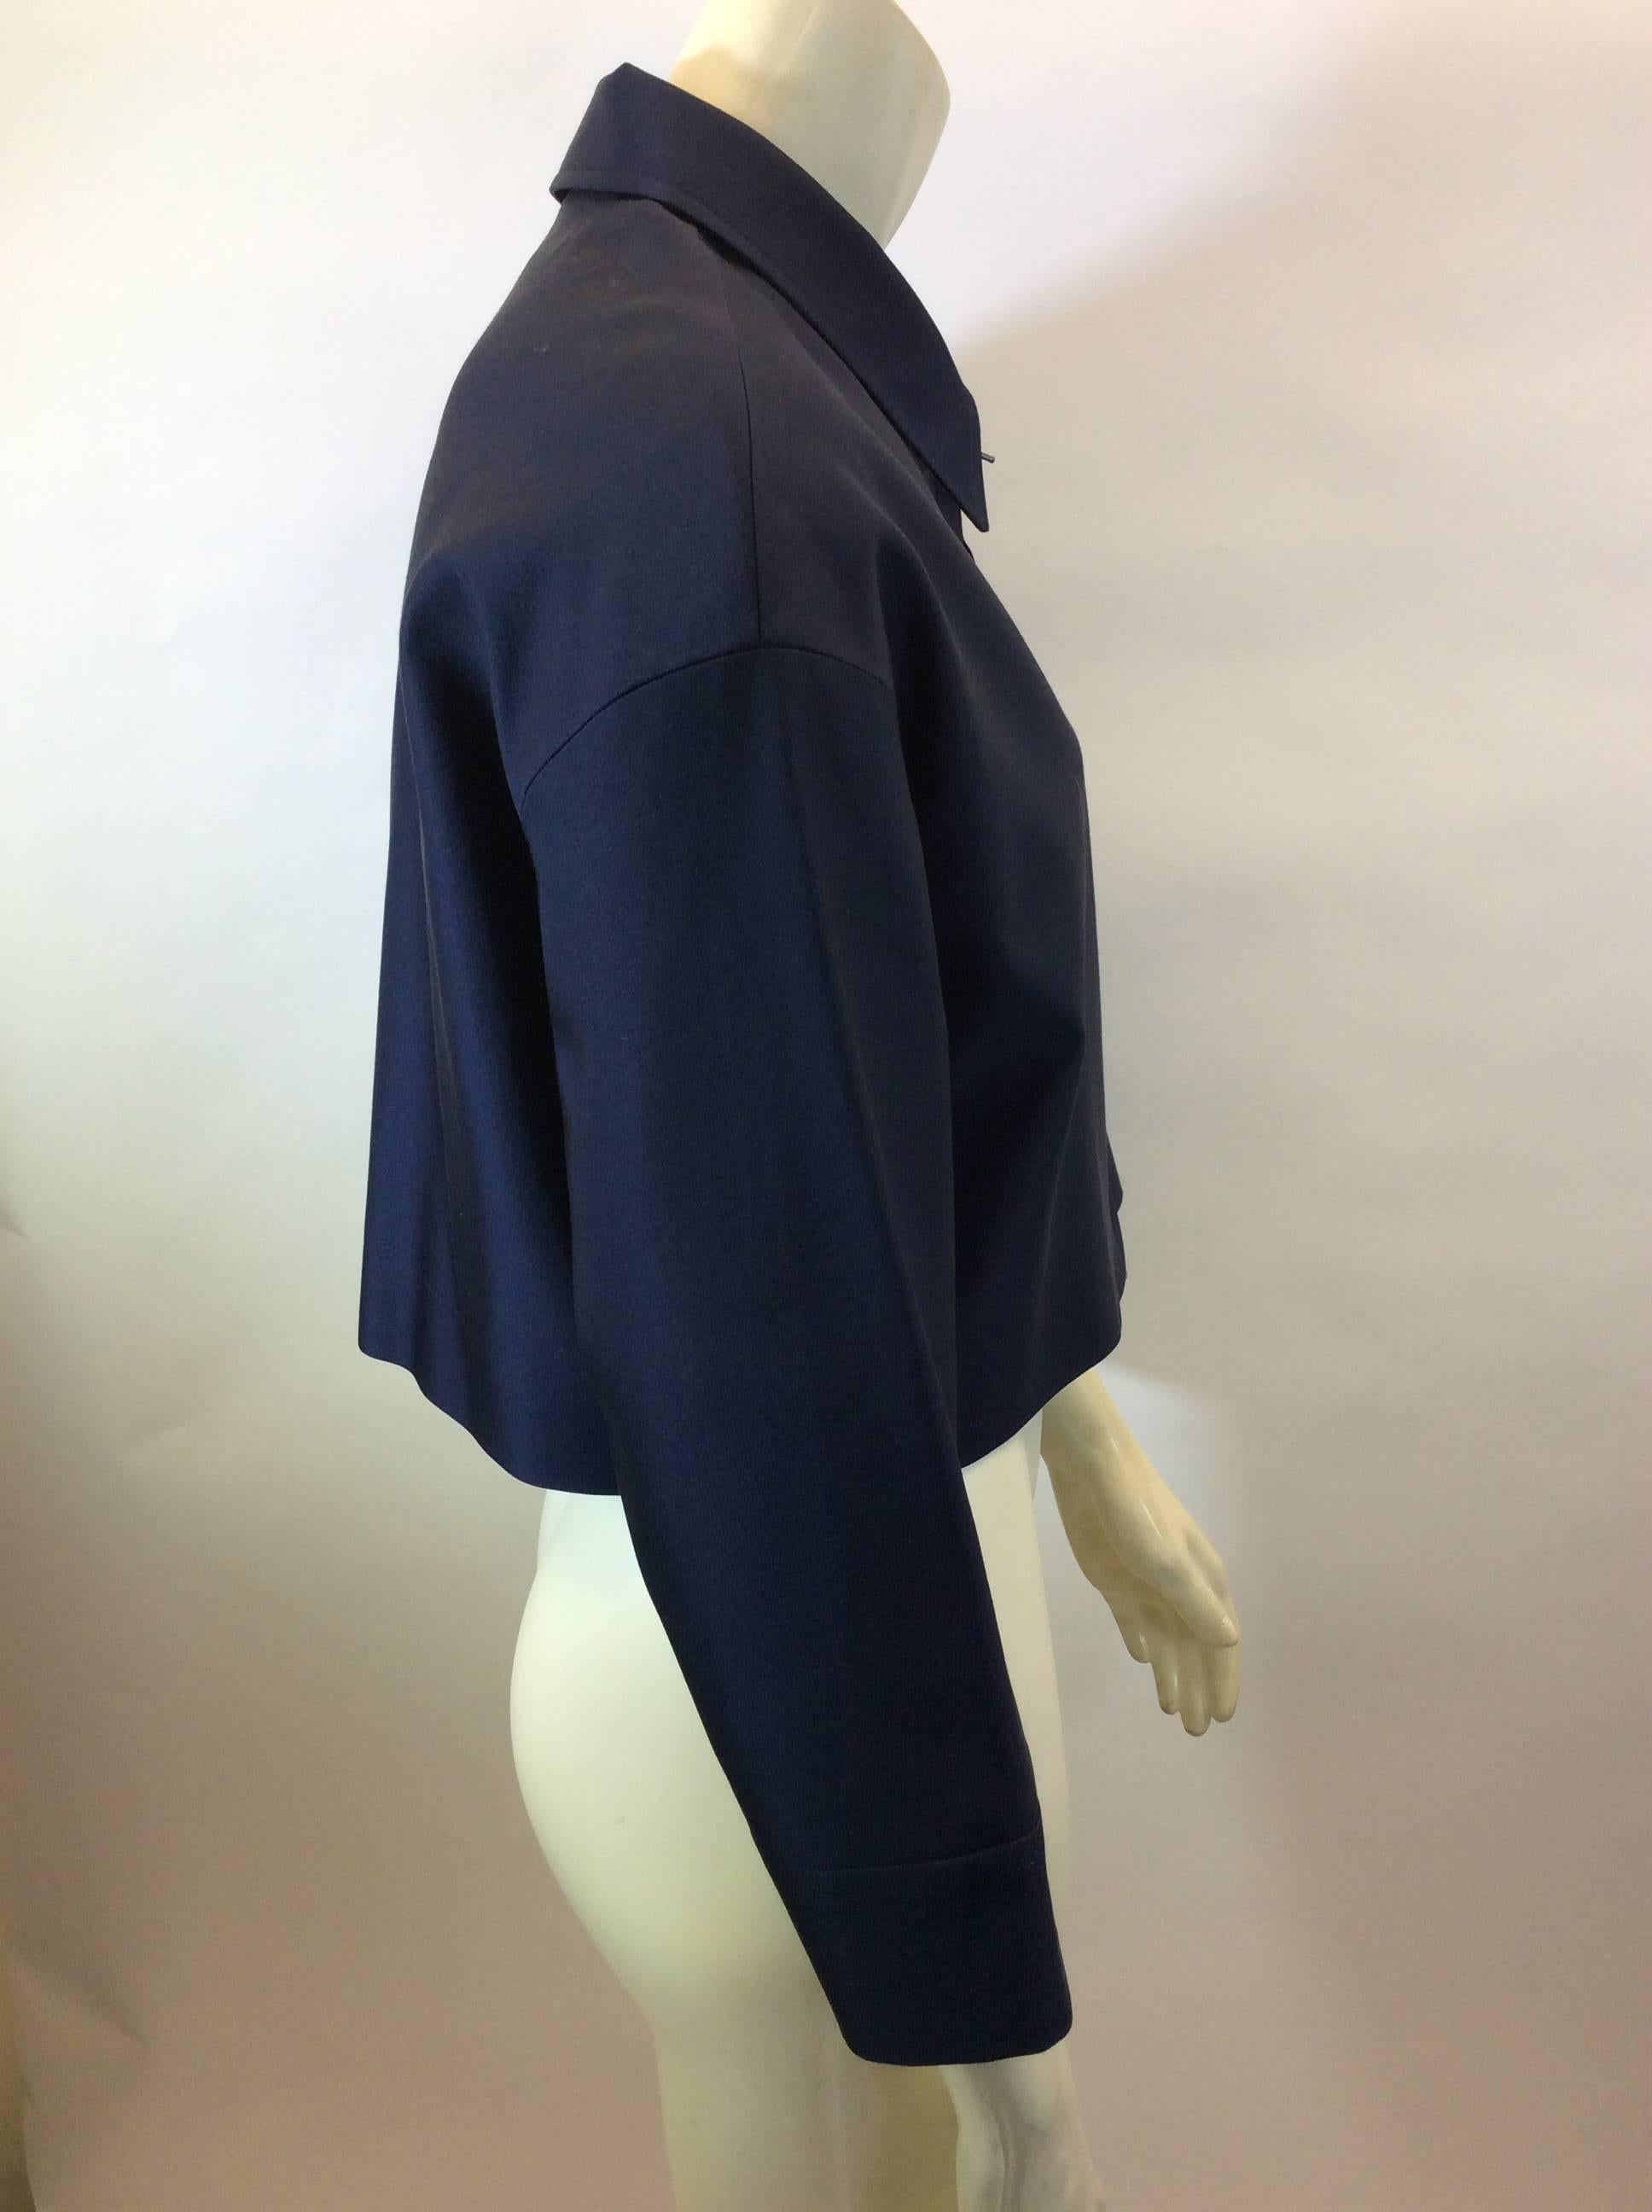 Prada Navy Cropped Jacket In Excellent Condition For Sale In Narberth, PA